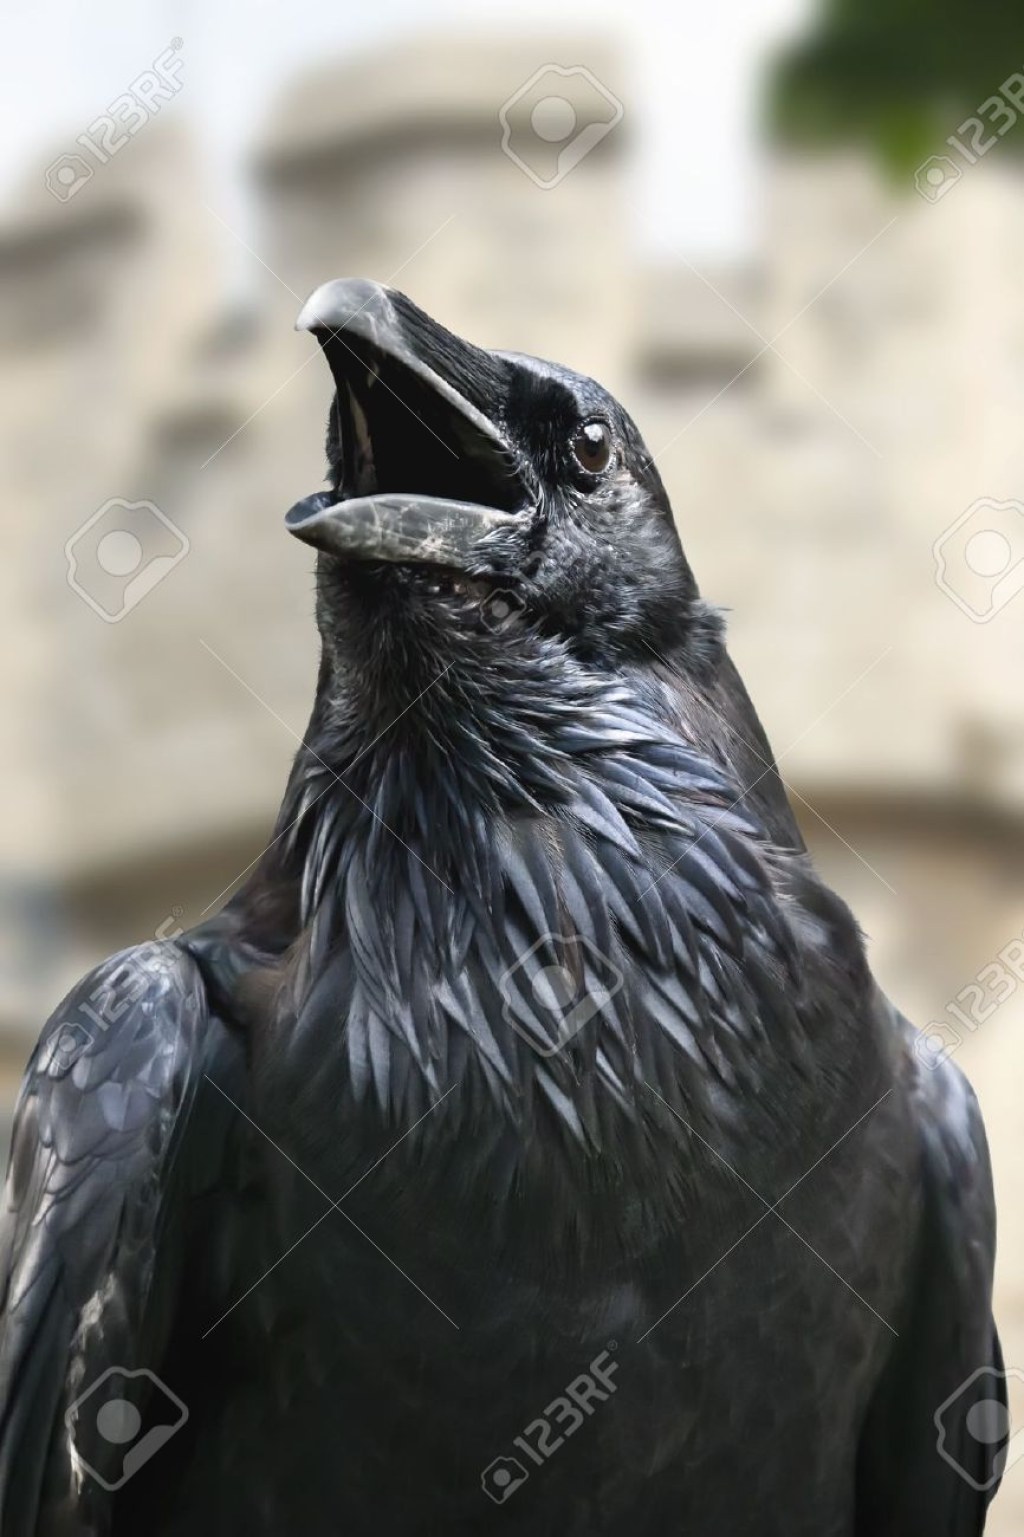 Picture of: Raven front view  Crow, Crow bird, London tattoo